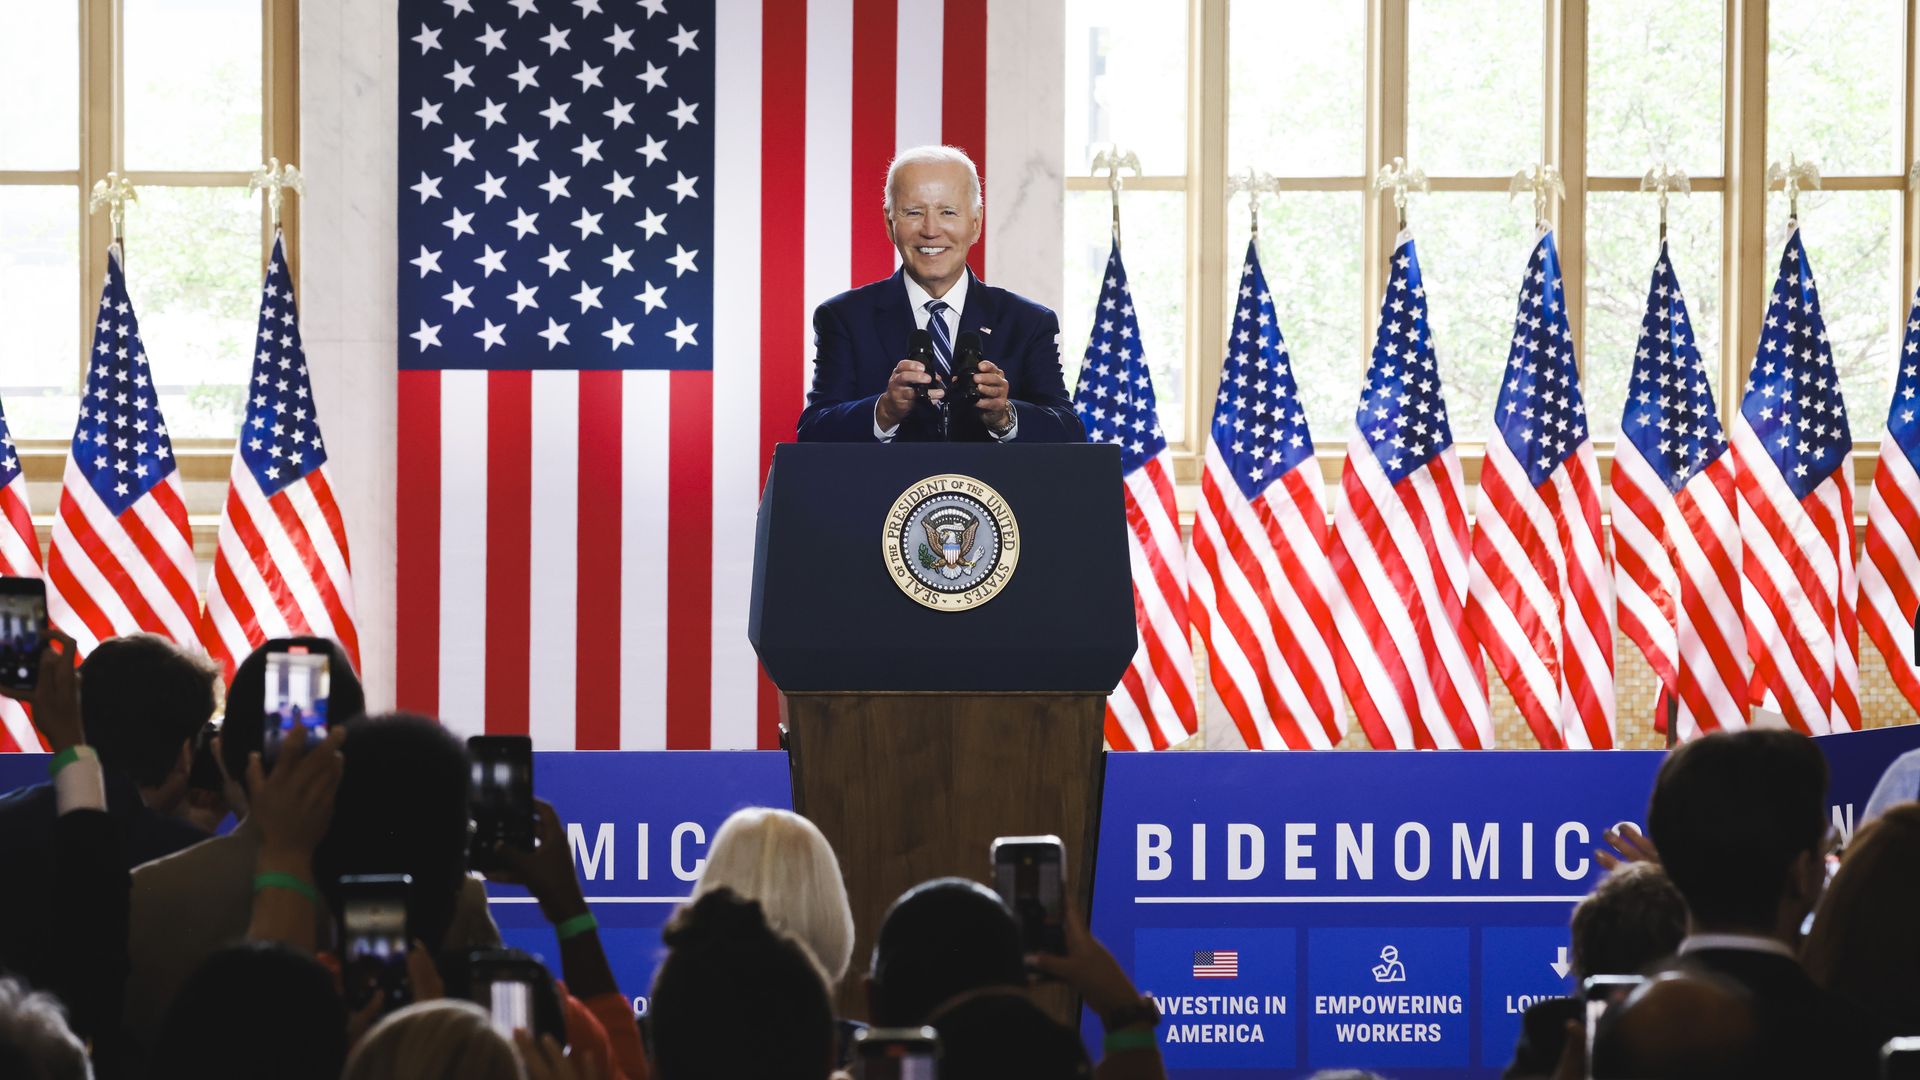 US President Joe Biden speaks at a podium during an event at the Old Post Office in Chicago, Illinois, US, on Wednesday, June 28, 203, to deliver a major address to outline the theory and practice of "Bidenomics."